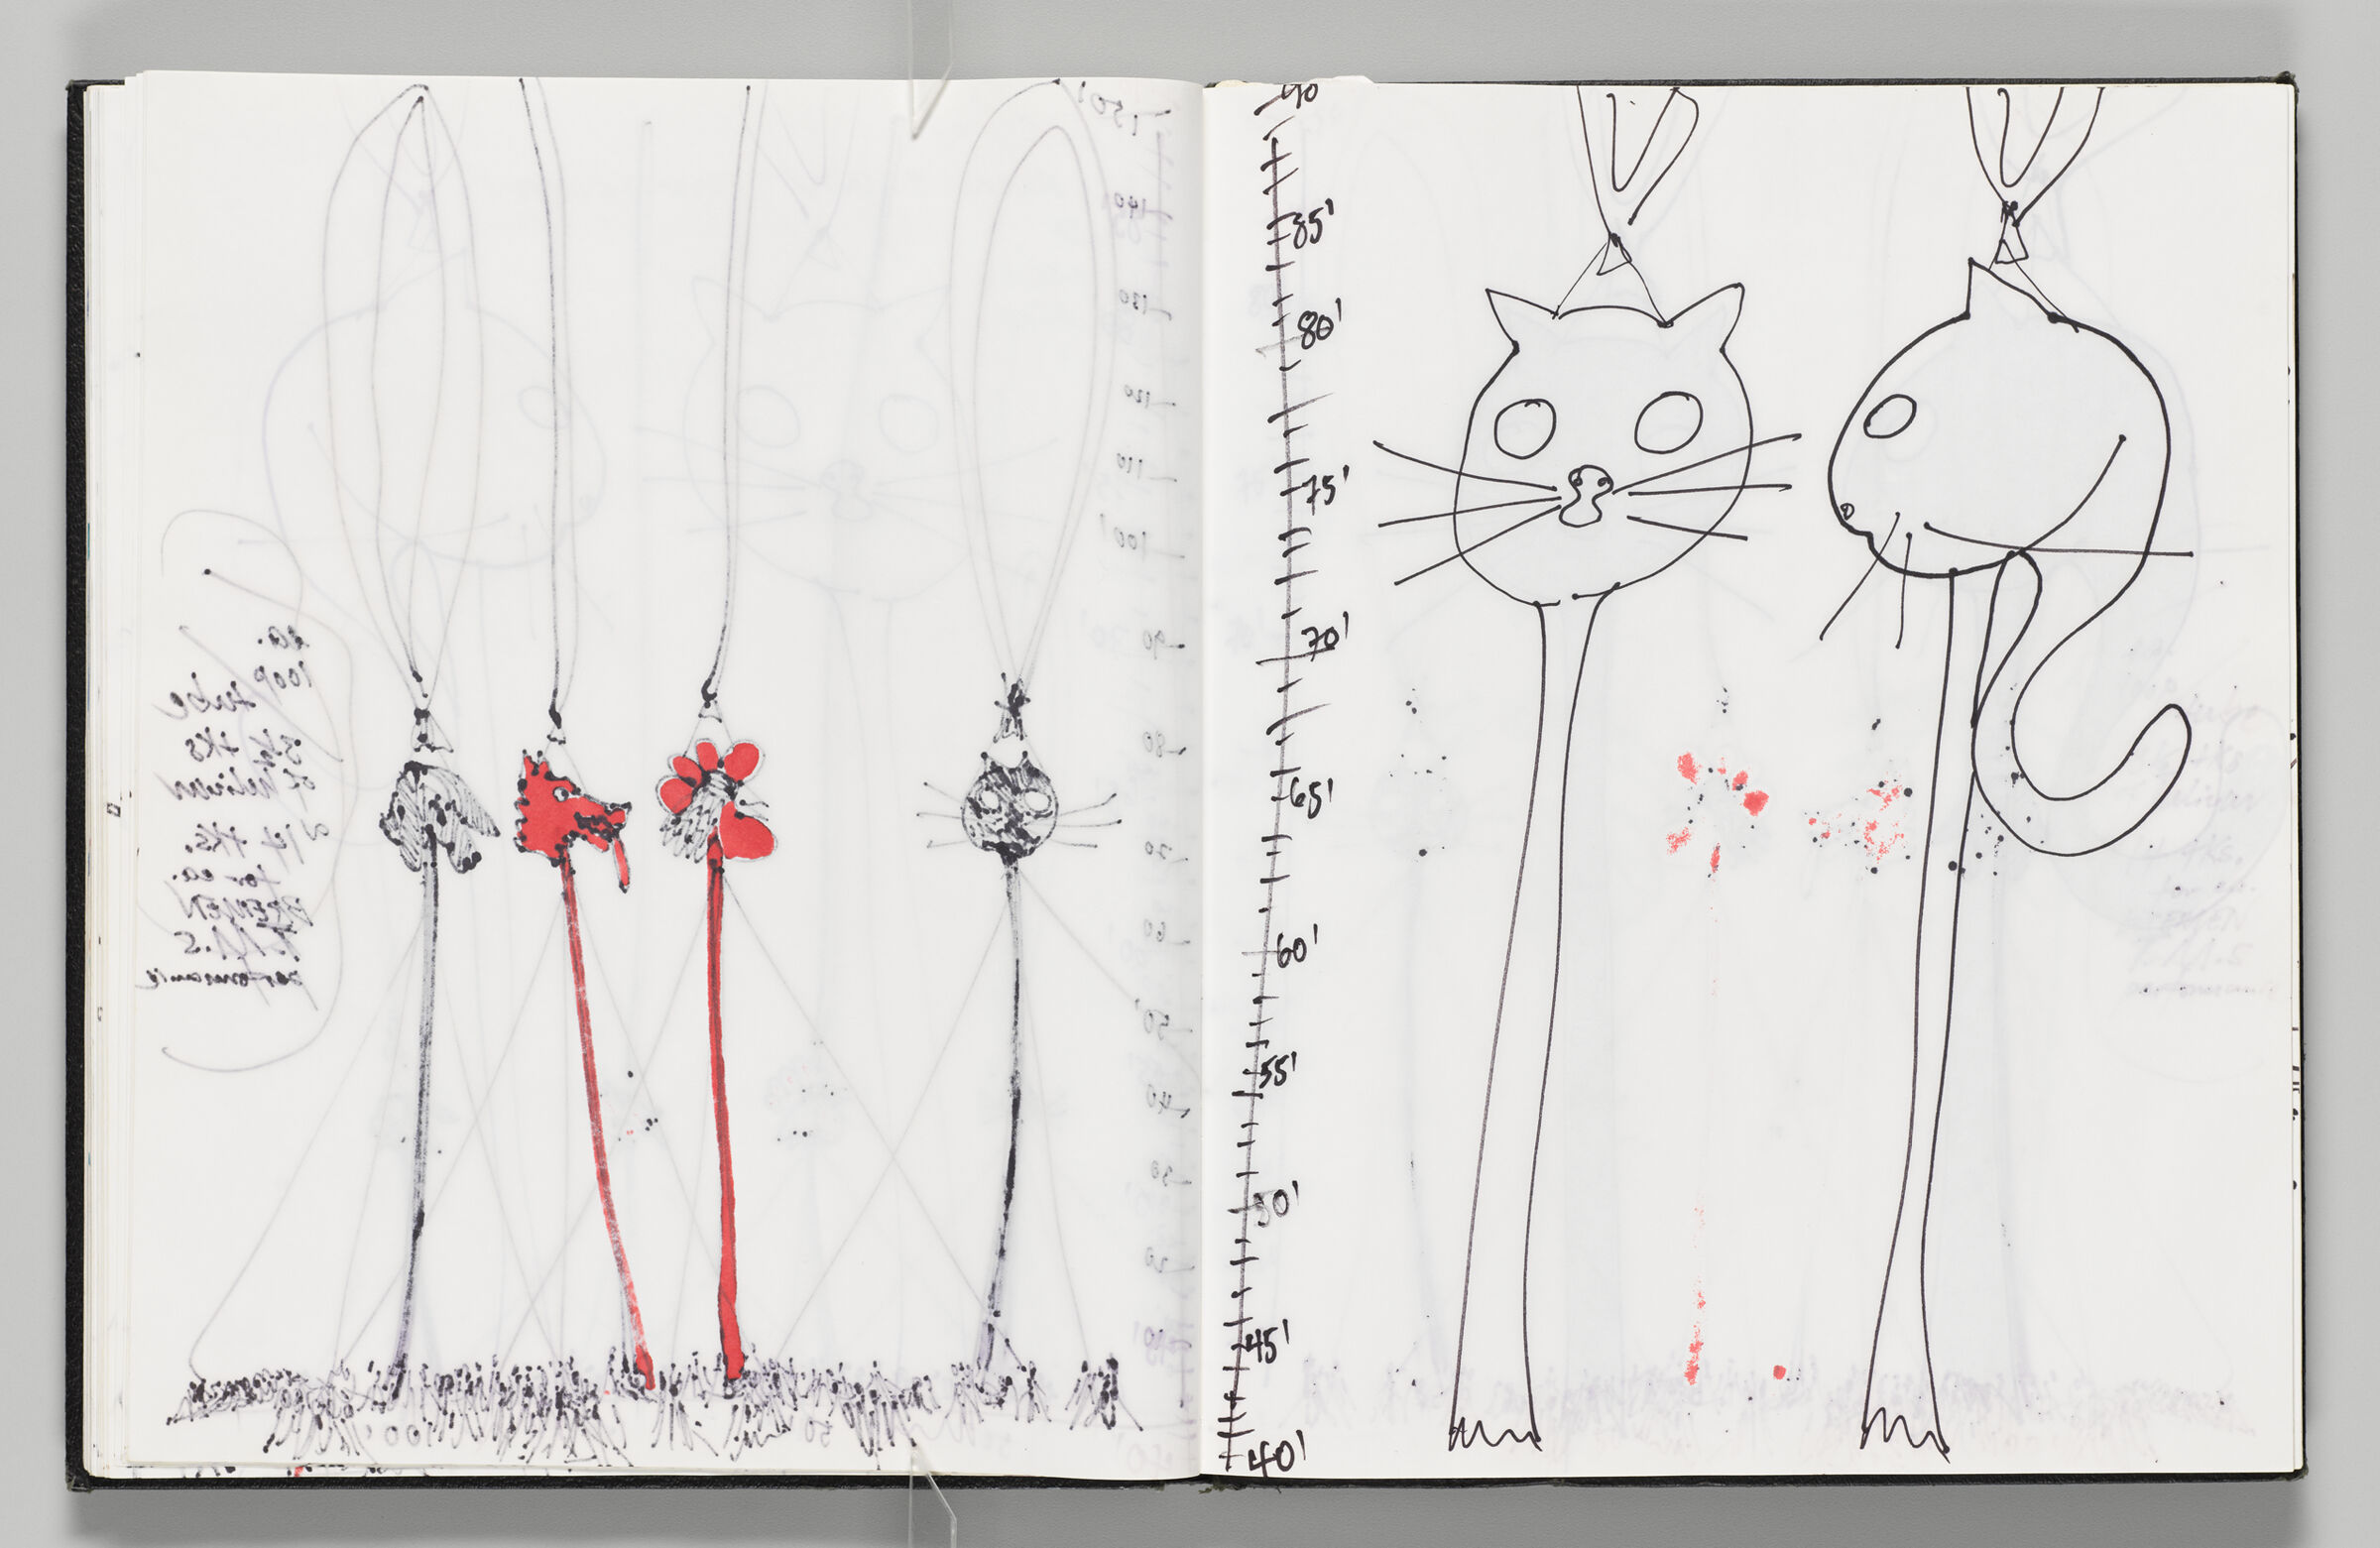 Untitled (Bleed-Through Of Previous Page, Left Page); Untitled (Scale Of Cat Inflatable With Color Transfer, Right Page)